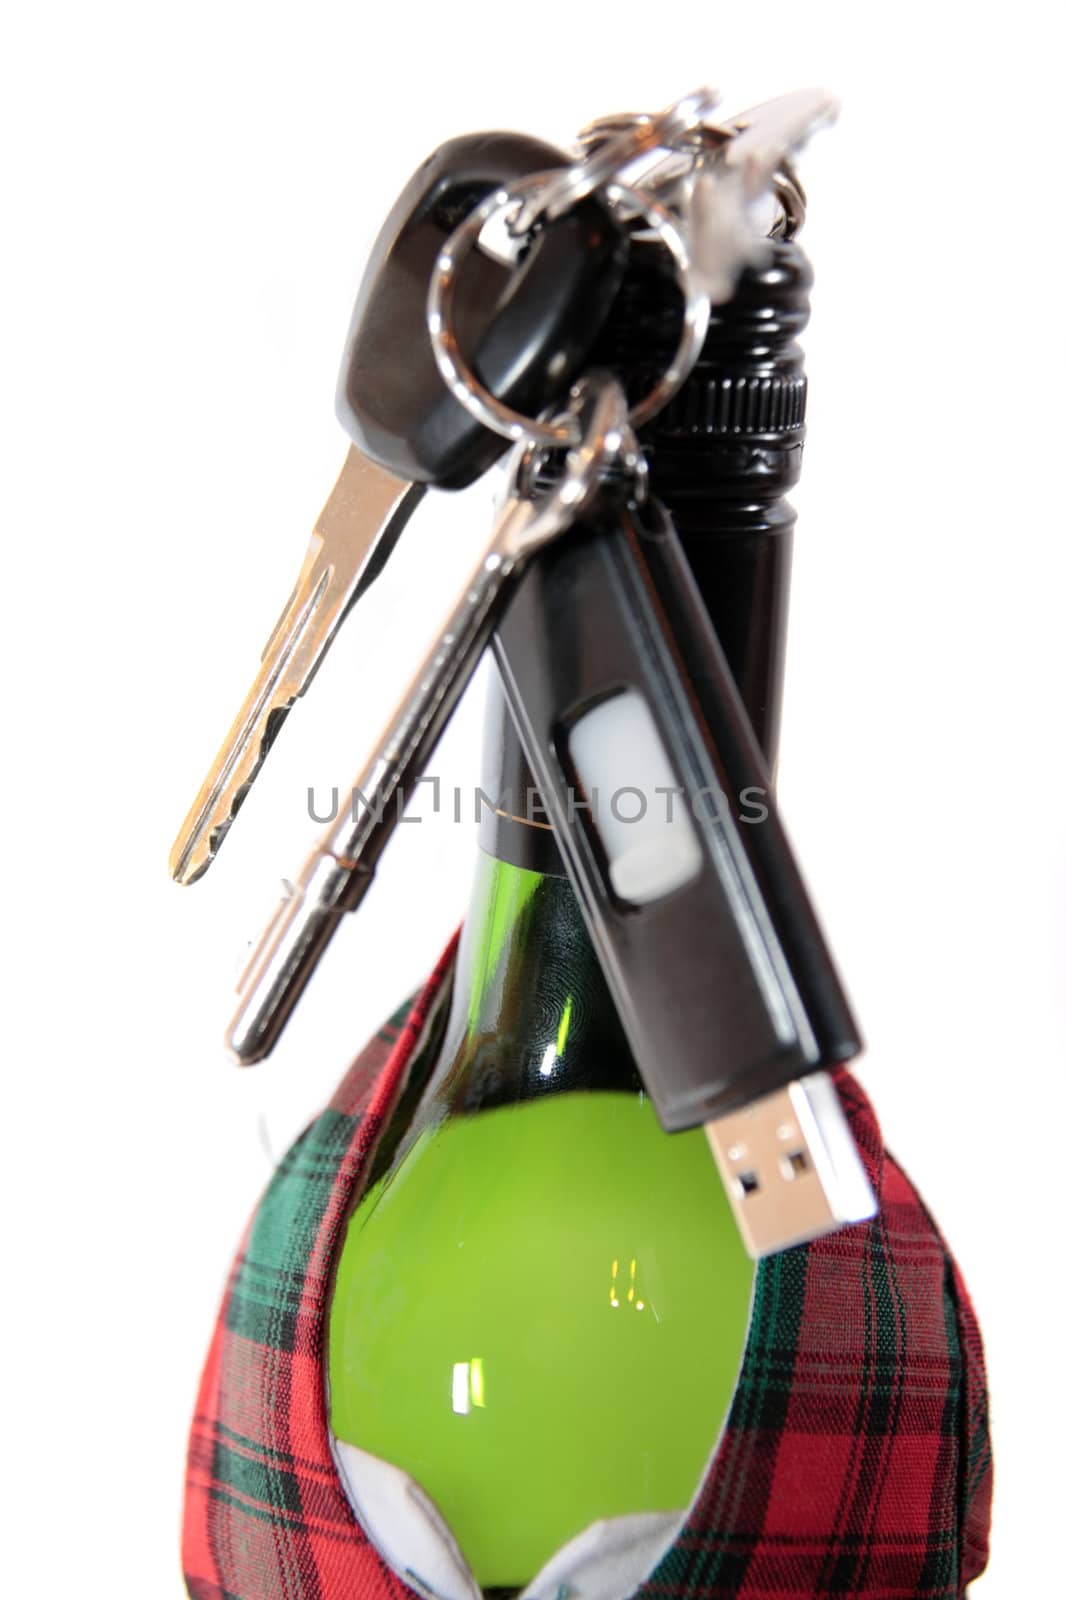 bottle dressed in jacket warmer with keys hanging on alcohol bottle on white background depicting drunk driving and addictions can kill